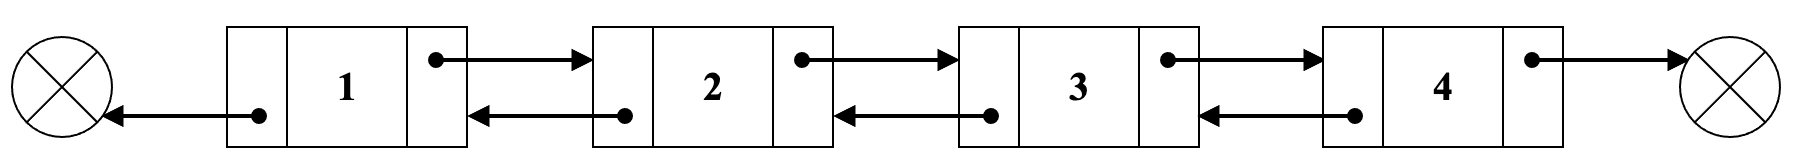 Example of Doubly Linked List